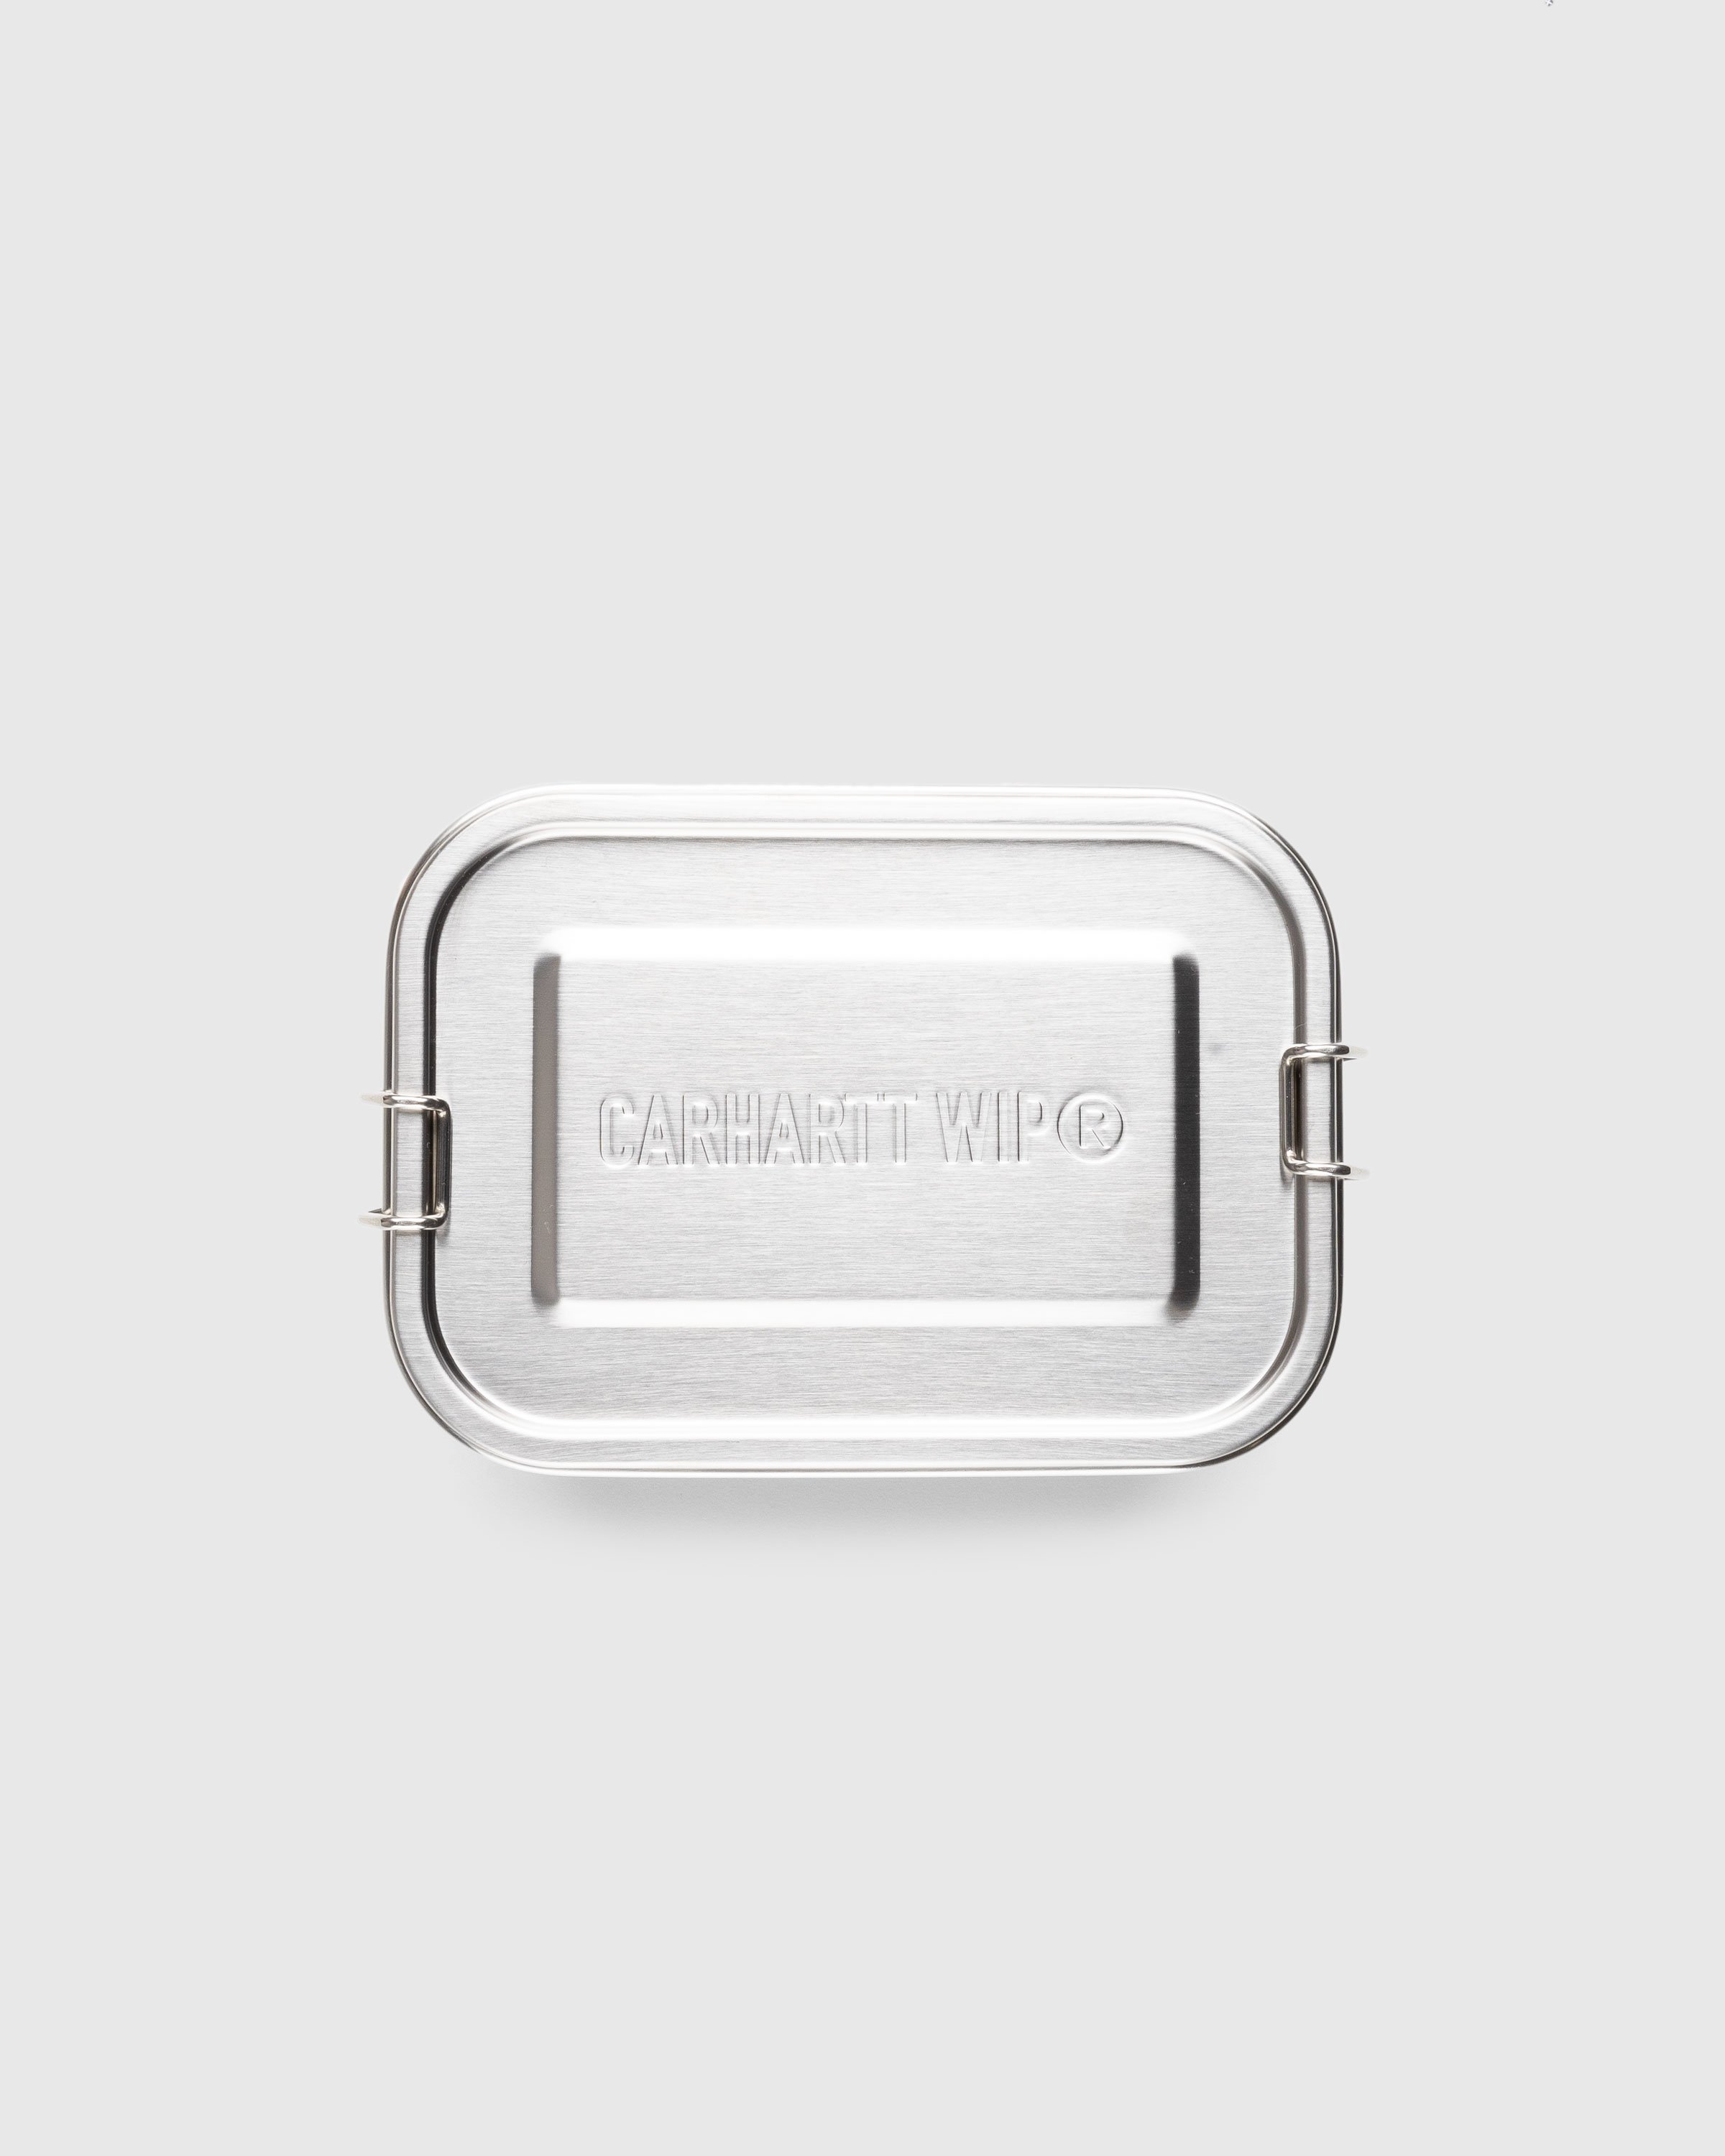 Carhartt WIP - Tour Lunch Box Green - Lifestyle - Green - Image 2